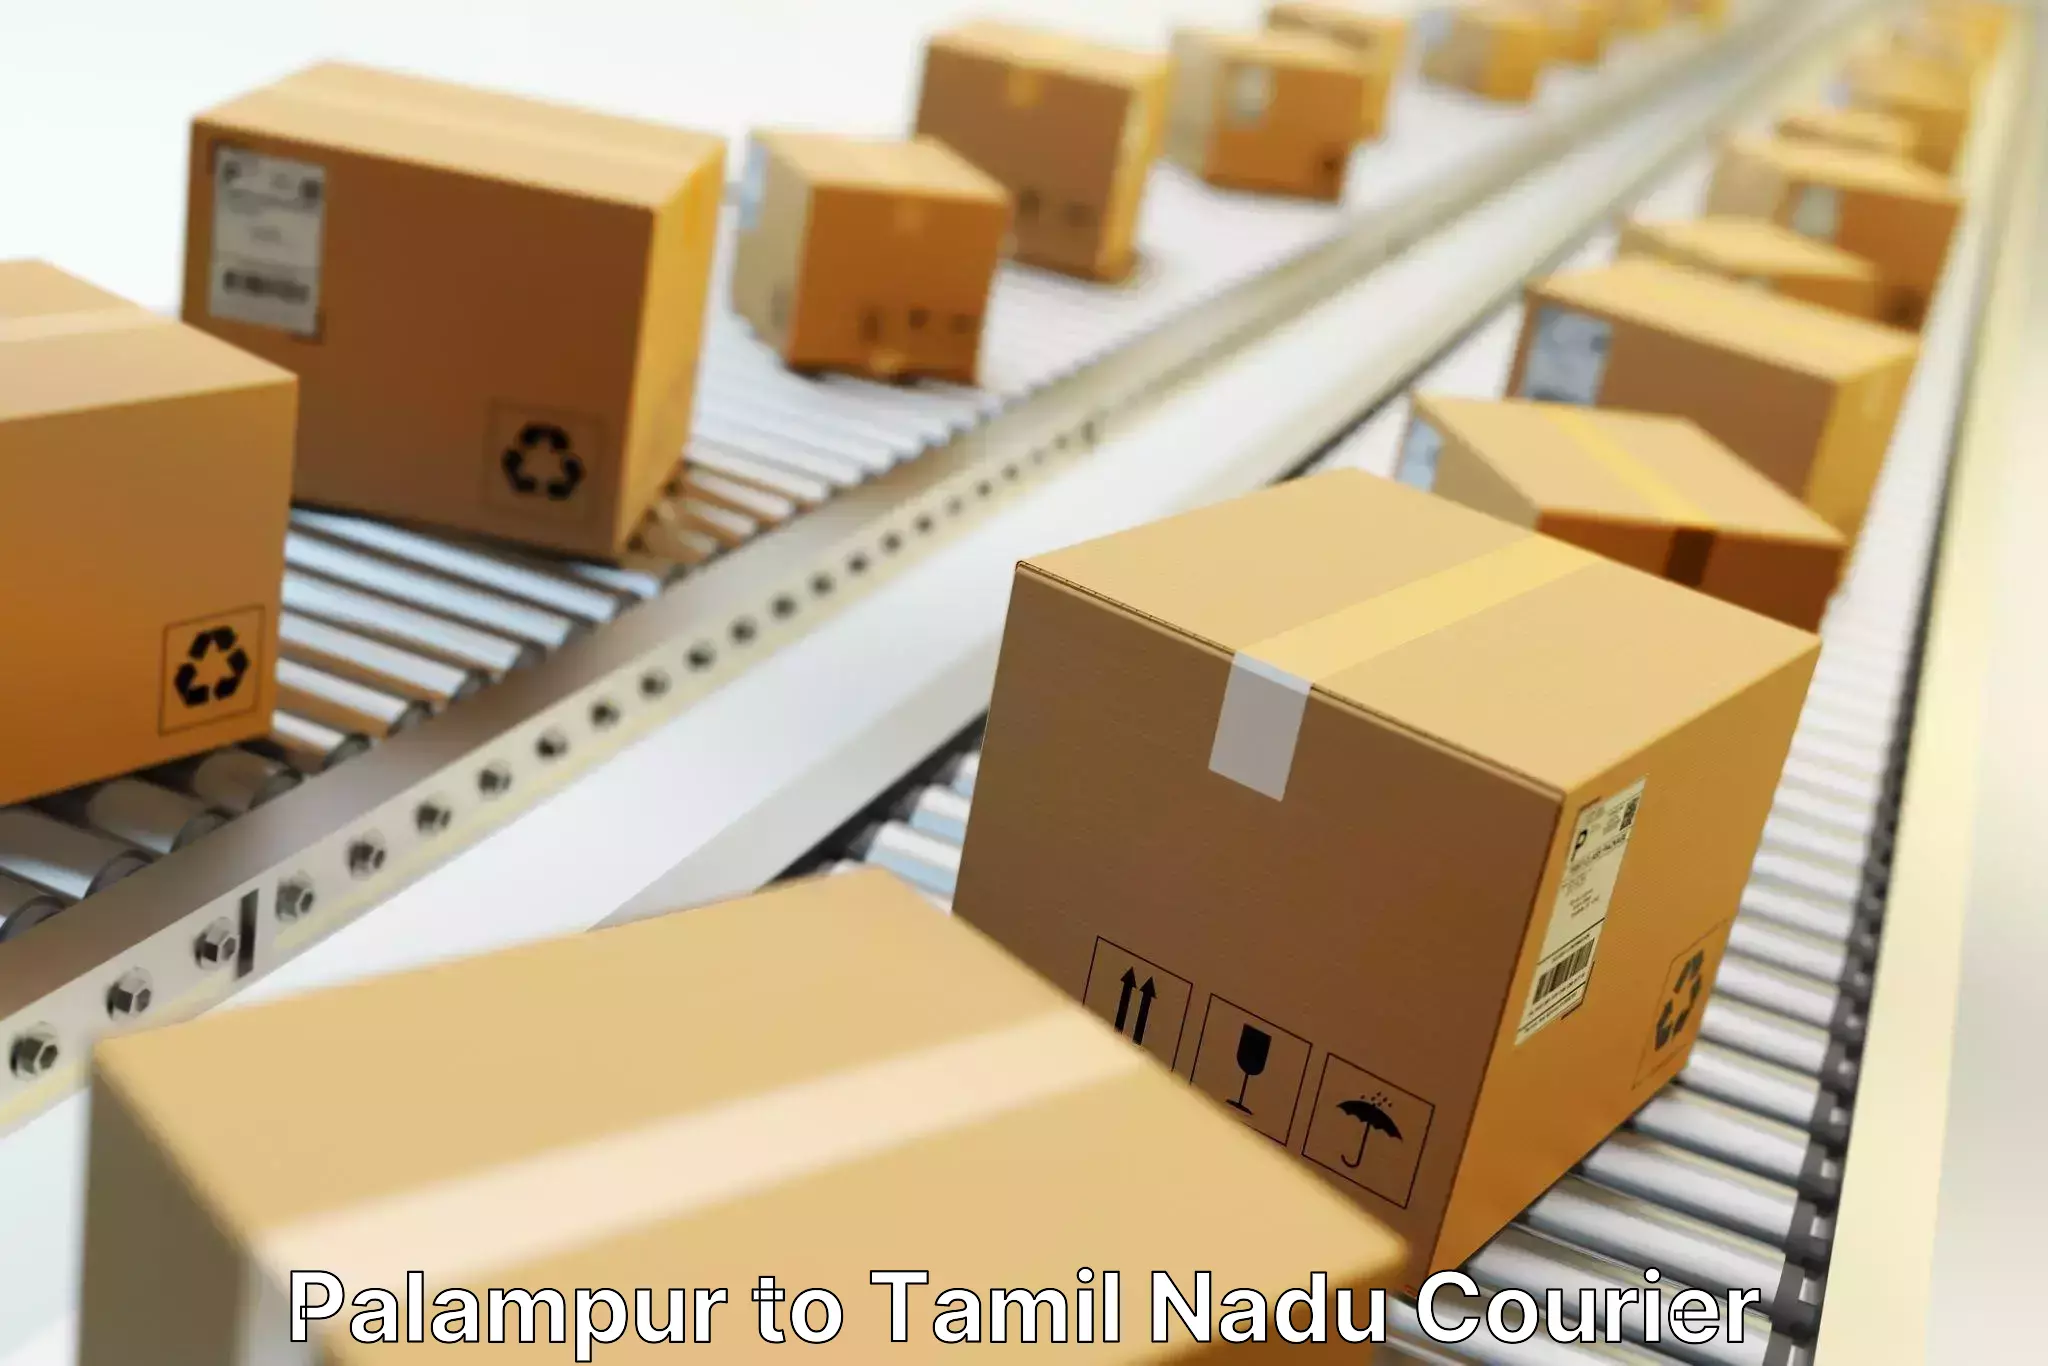 Efficient order fulfillment Palampur to Velur